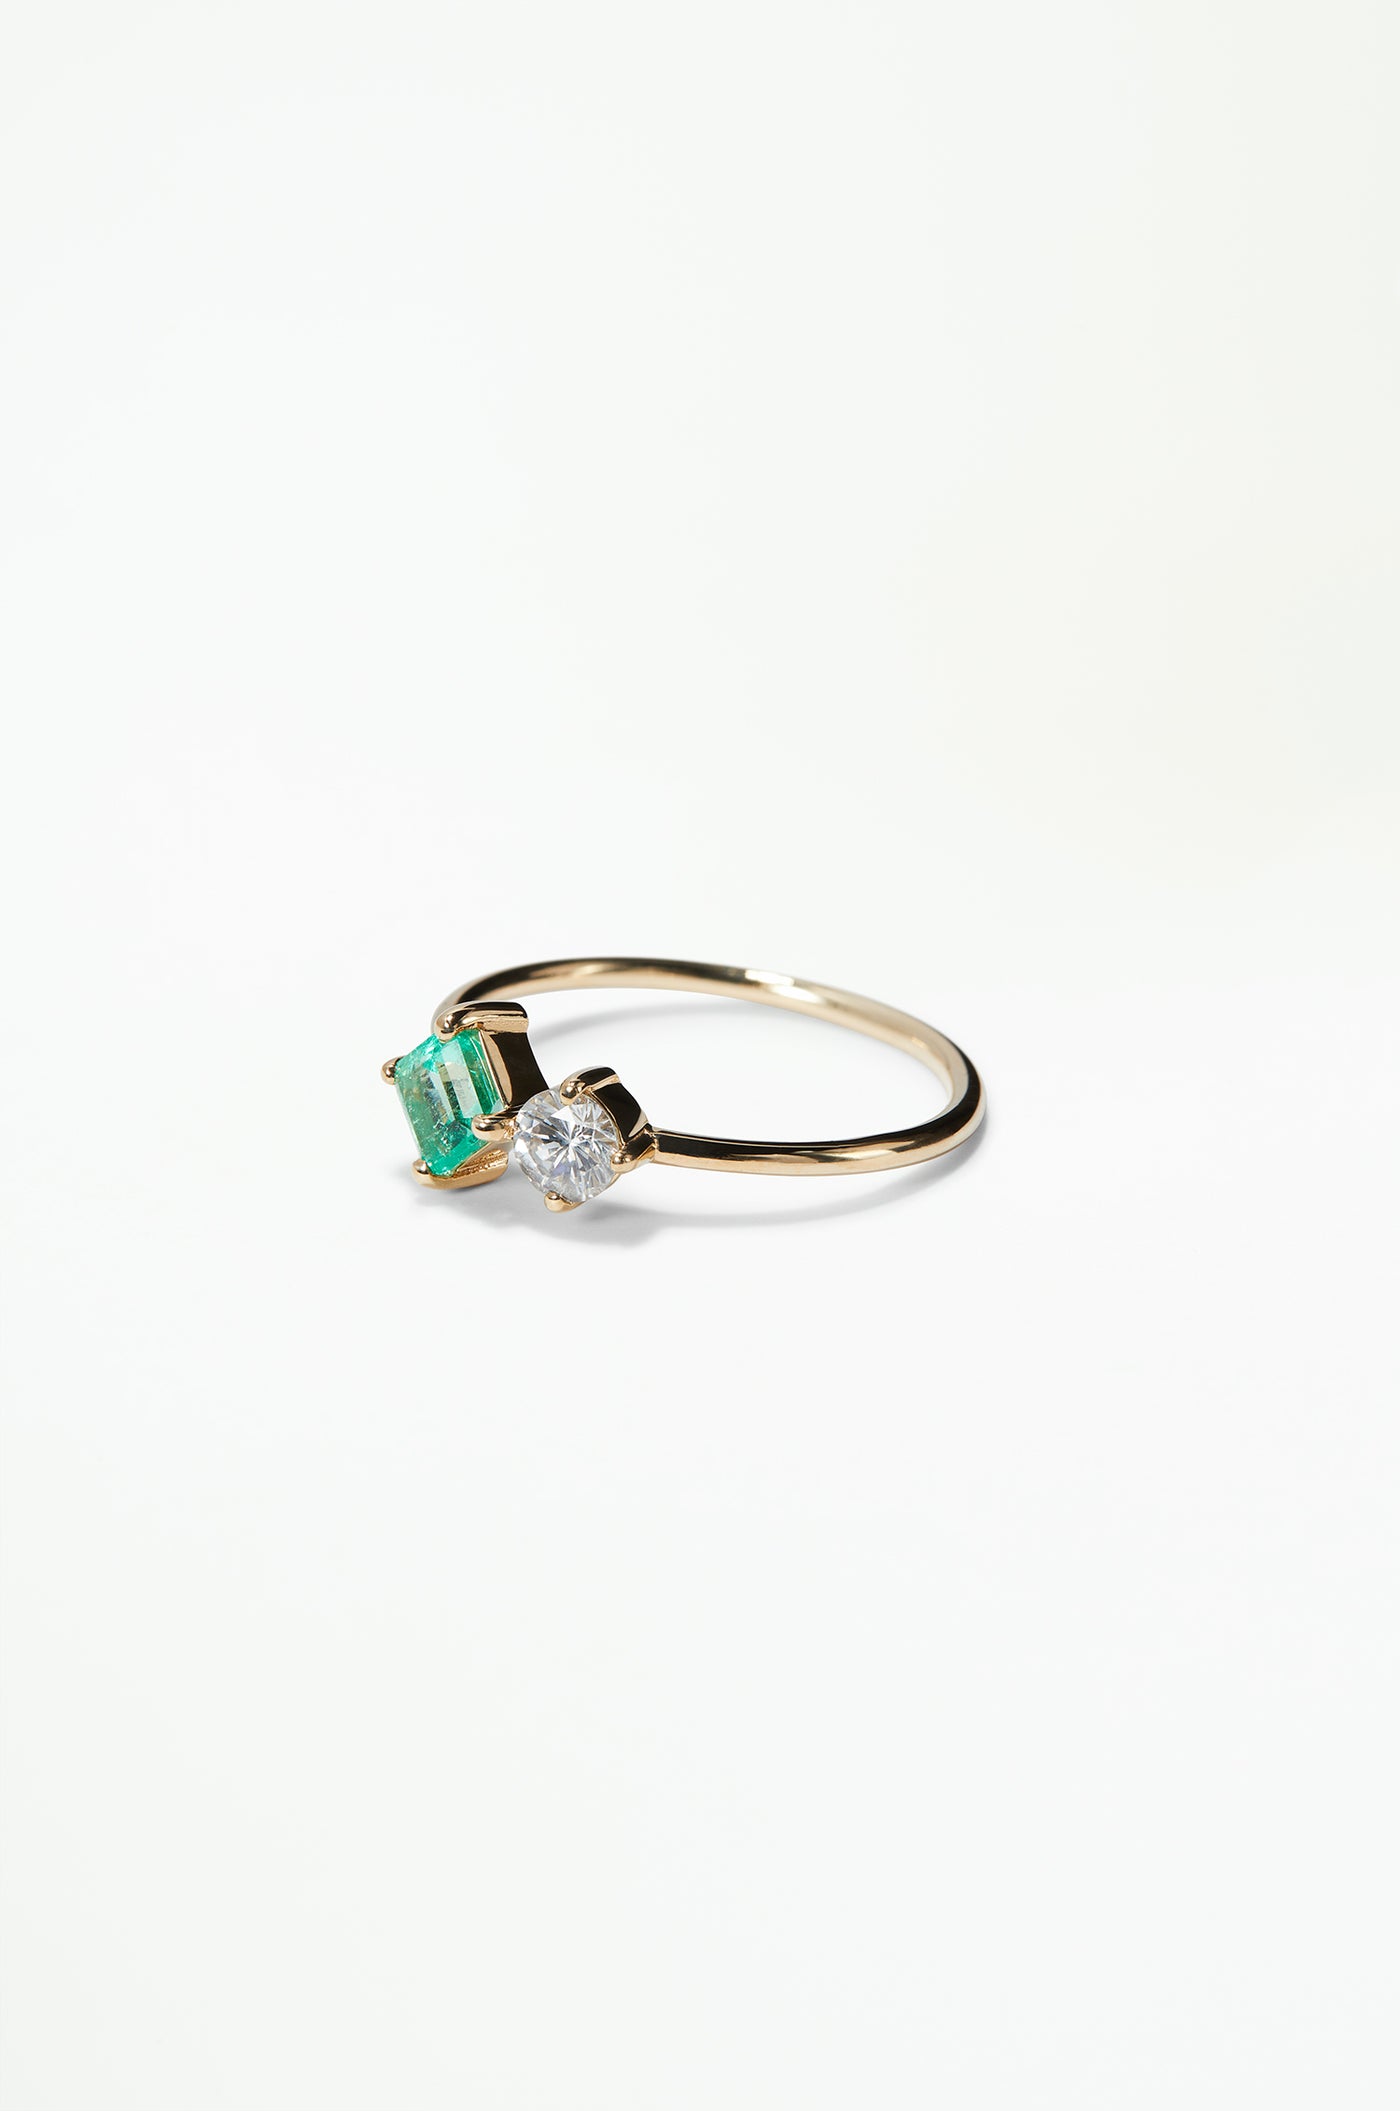 One of a Kind Mosaic Ring No. 12